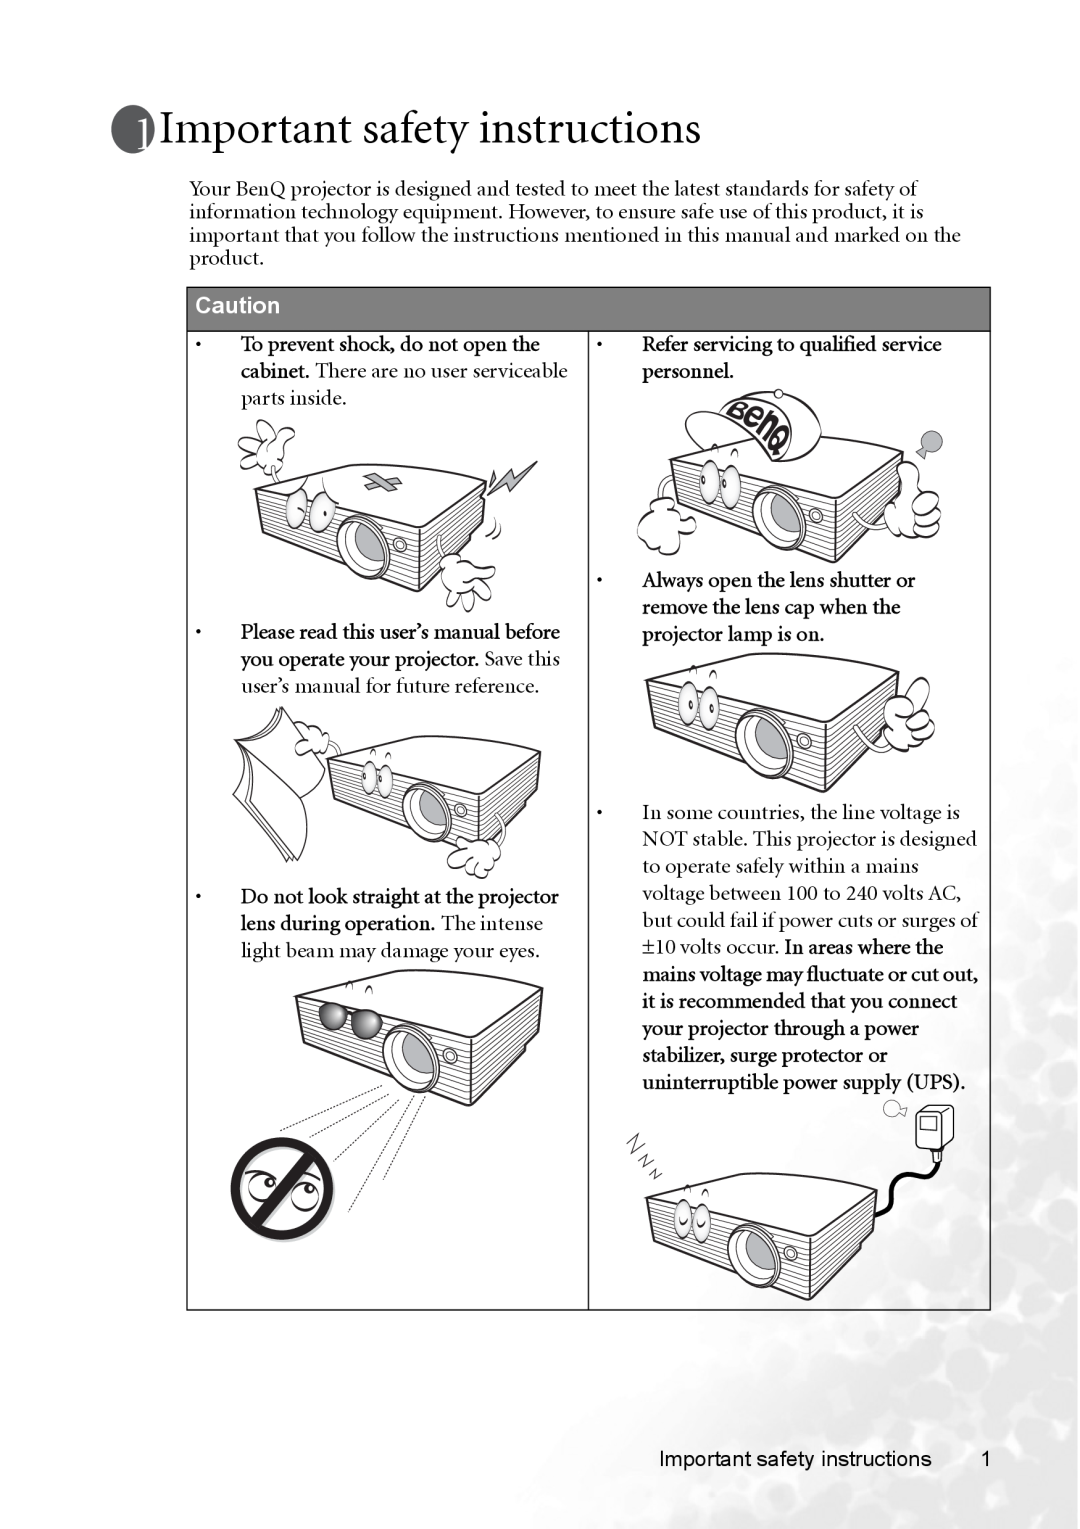 BenQ CP120 manual Important safety instructions, Refer servicing to qualified service personnel 